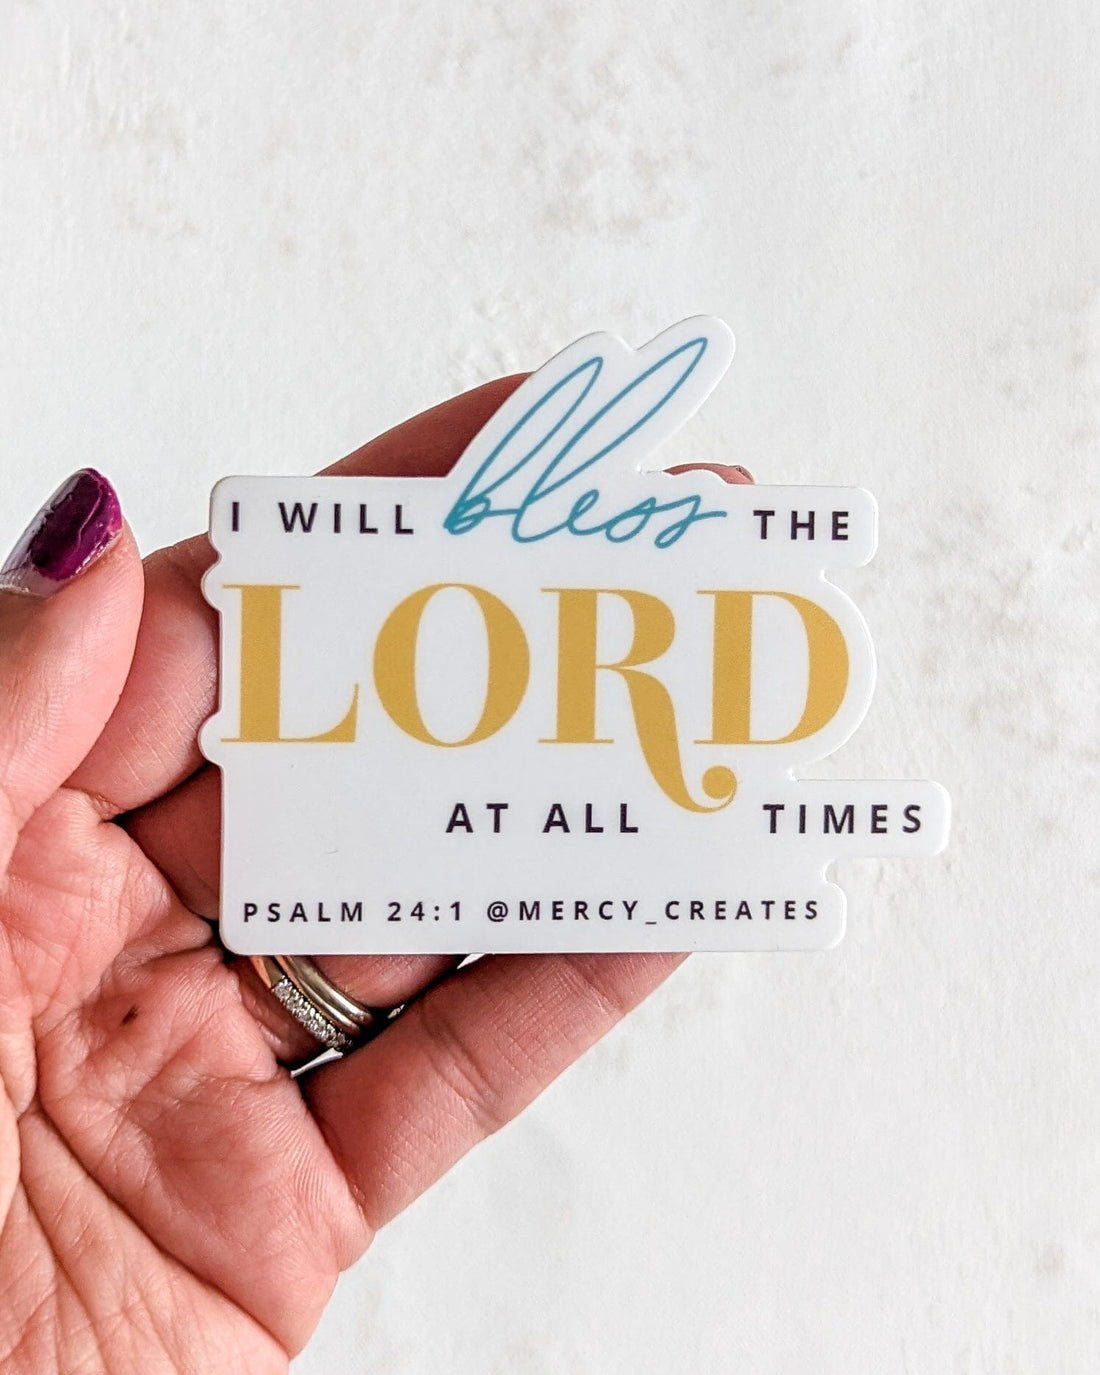 I Will Bless the Lord at All Times - Color Vinyl Sticker